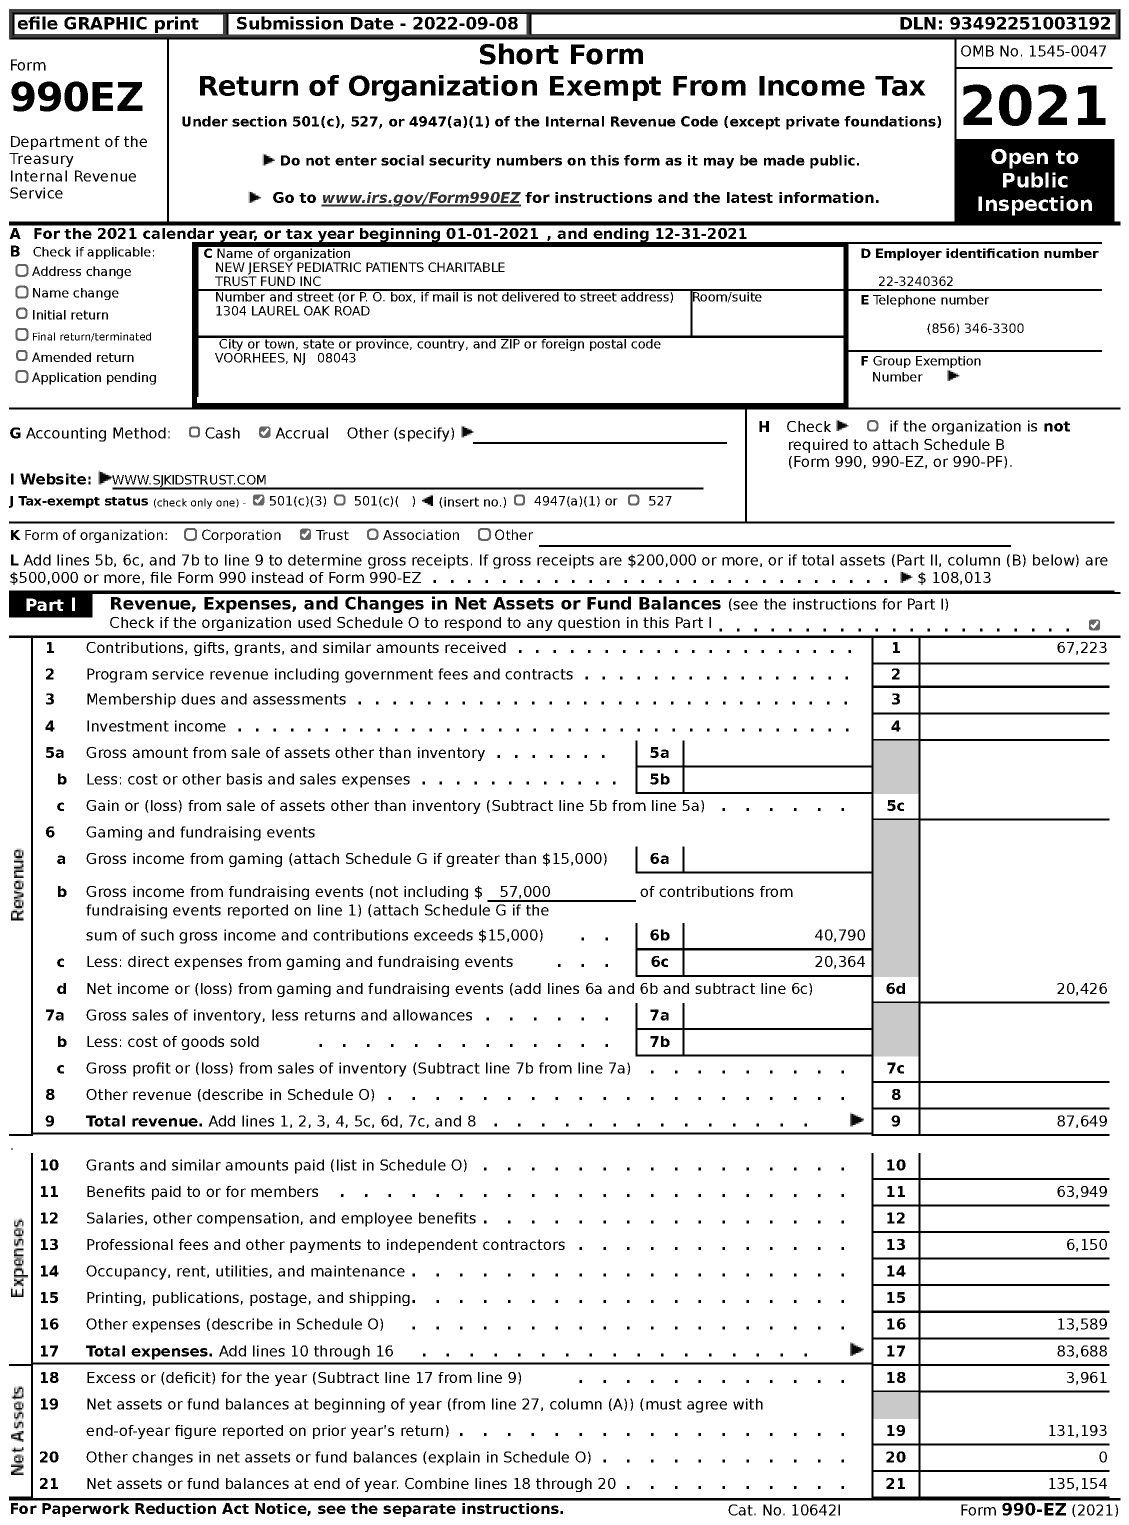 Image of first page of 2021 Form 990EZ for New Jersey Pediatric Patients Charitable Trust Fund